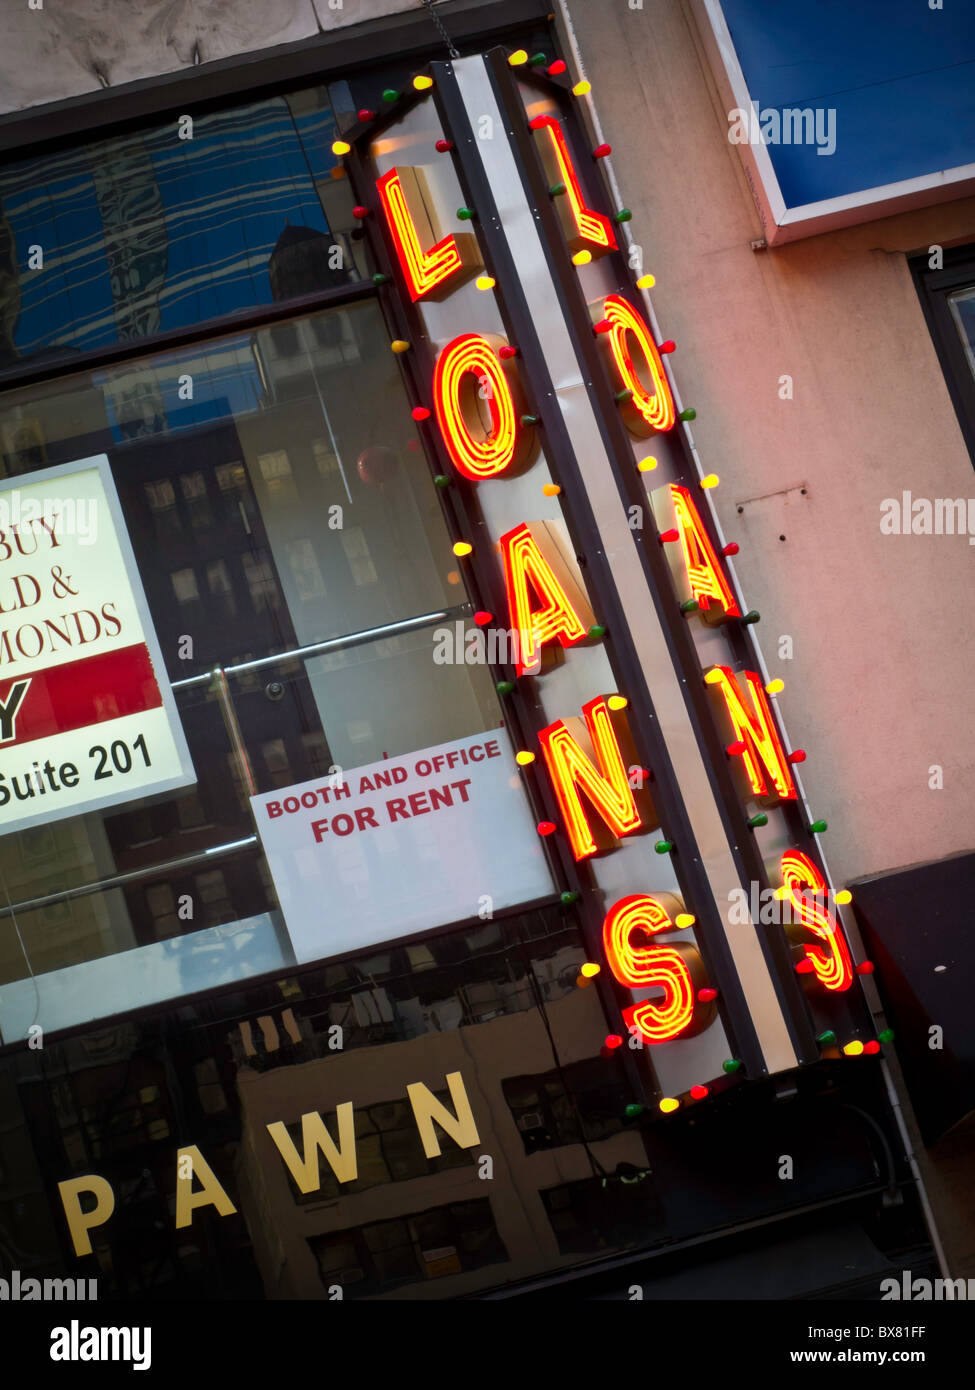 Pawn Shop and Loans Sign, NYC, USA Stock Photo